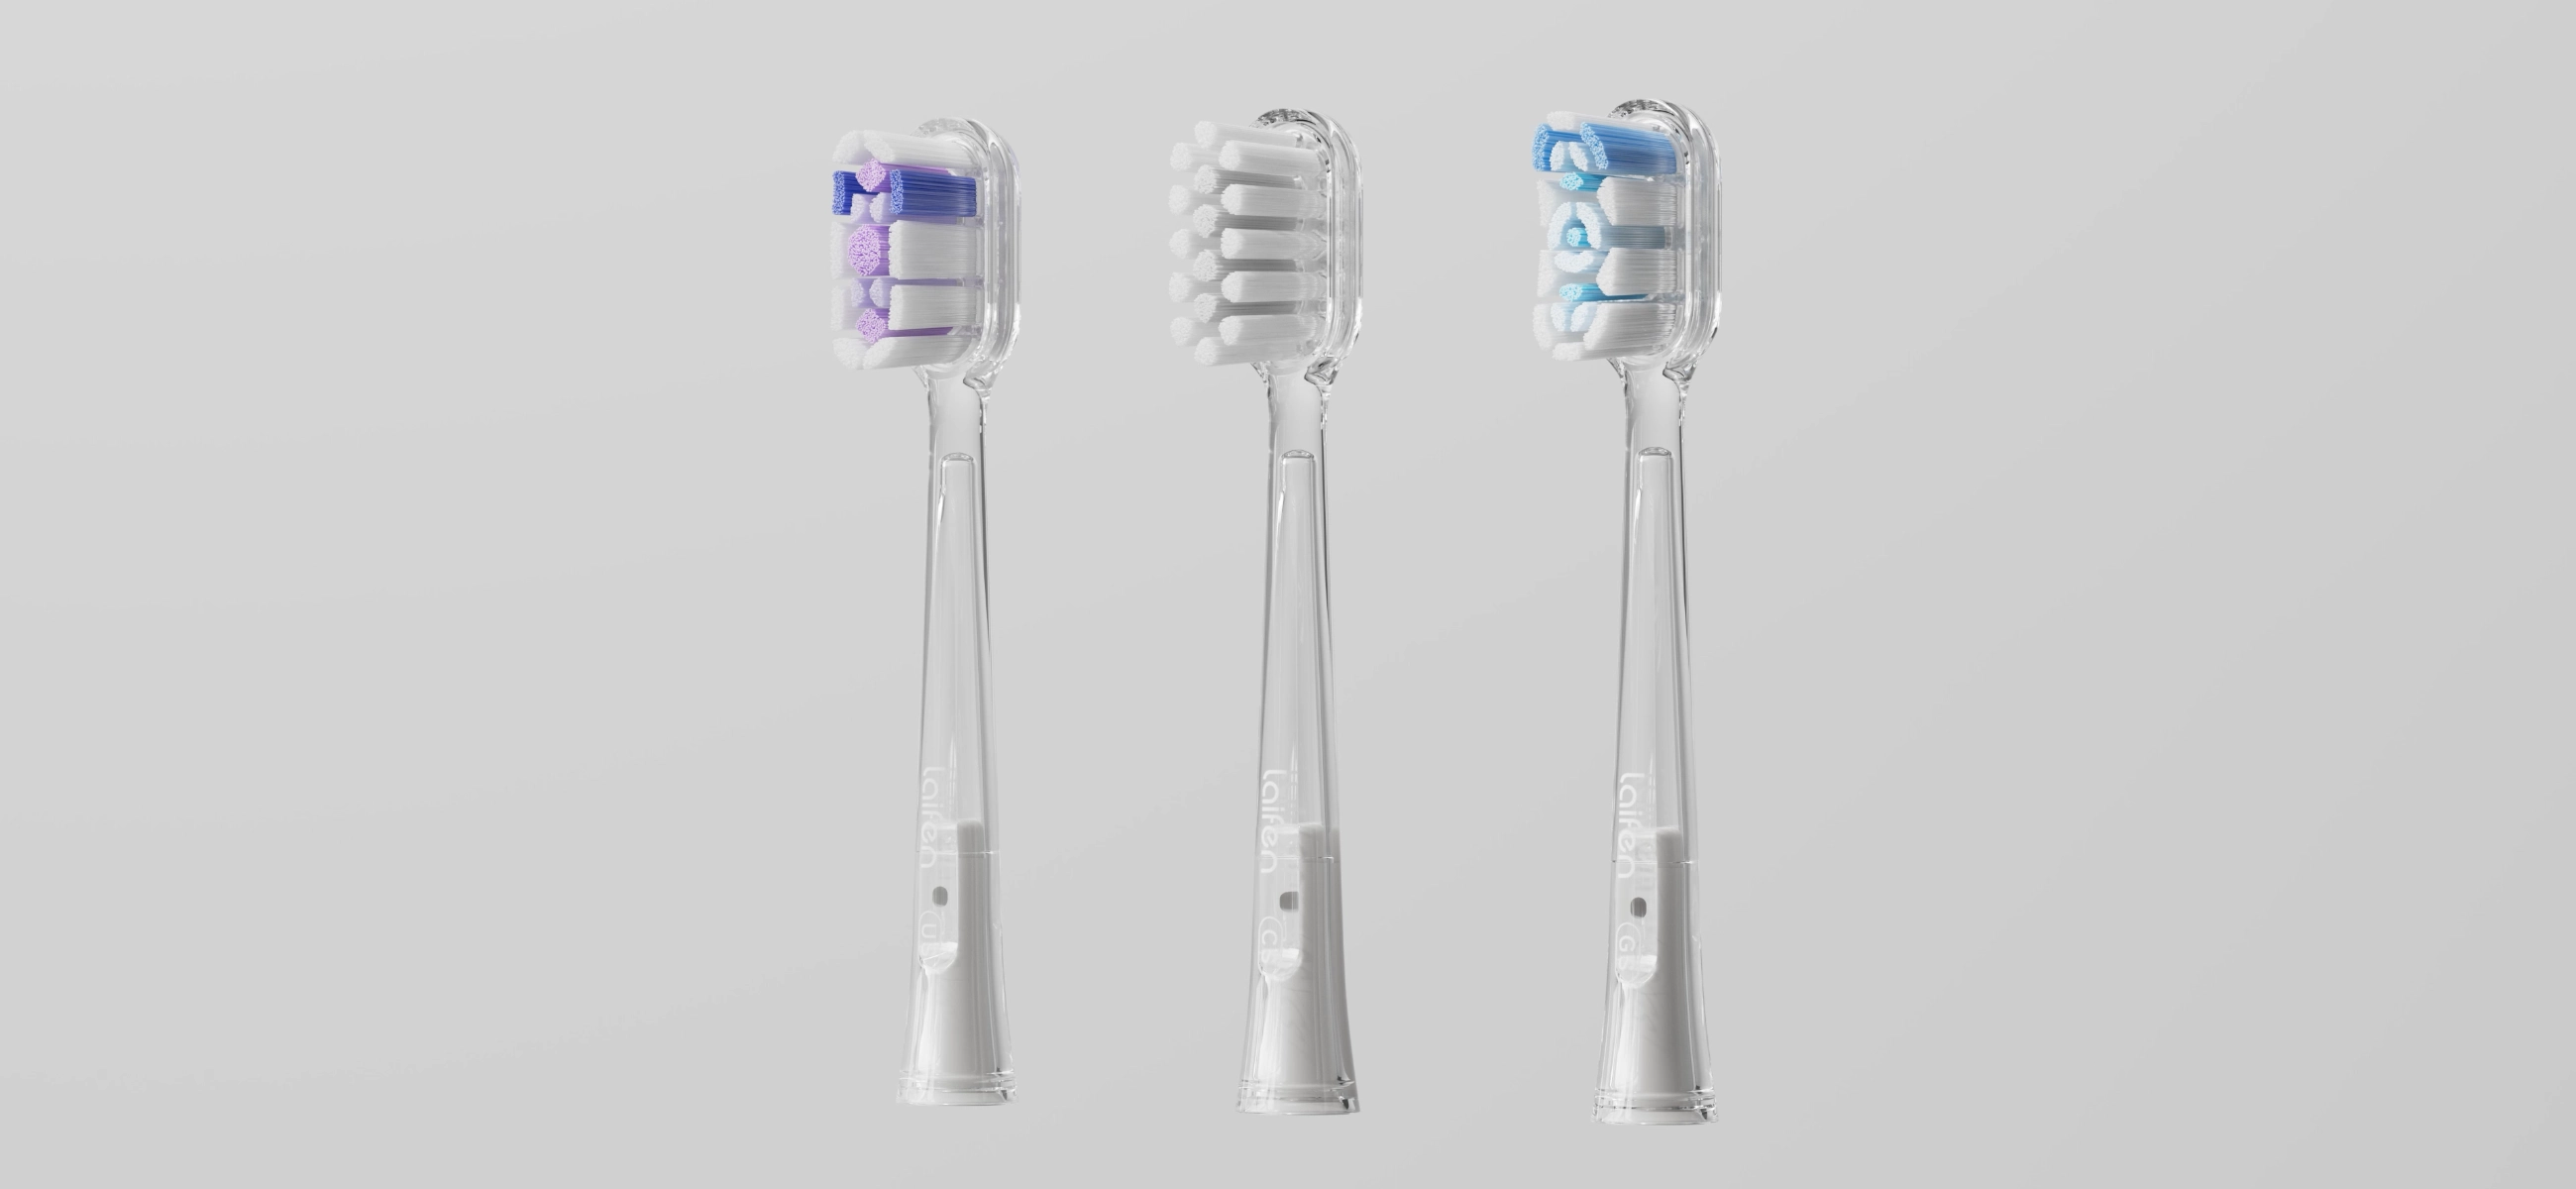 Toothbrush heads 101: How to clean, when to change, and more for optimal dental hygiene